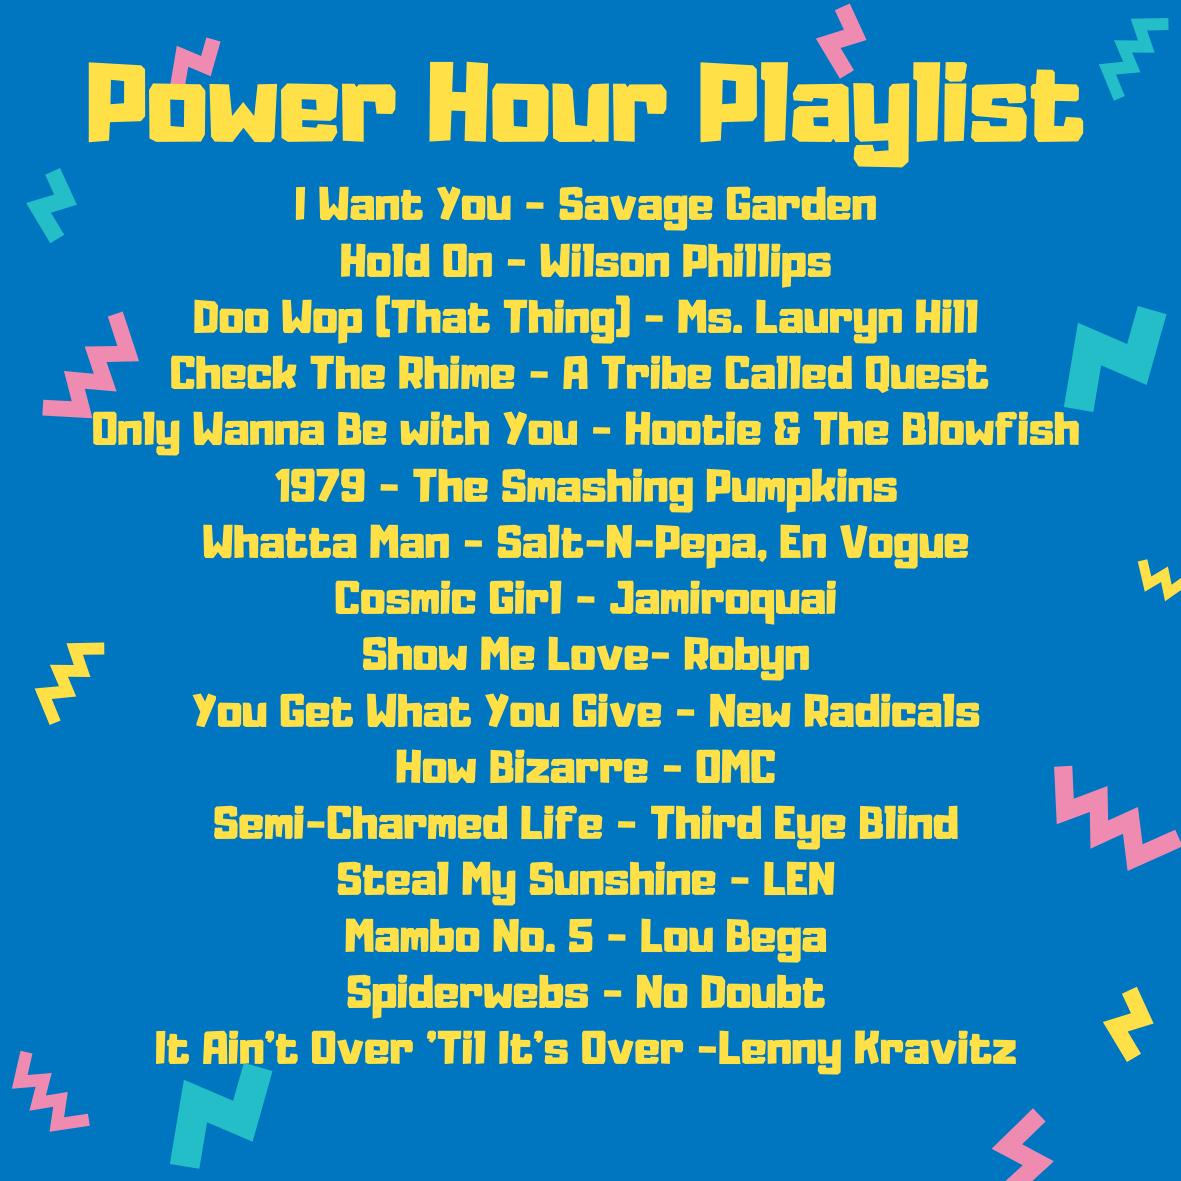 Power Hour Playlist: 1990s Edition with a list of great songs from the '90s.